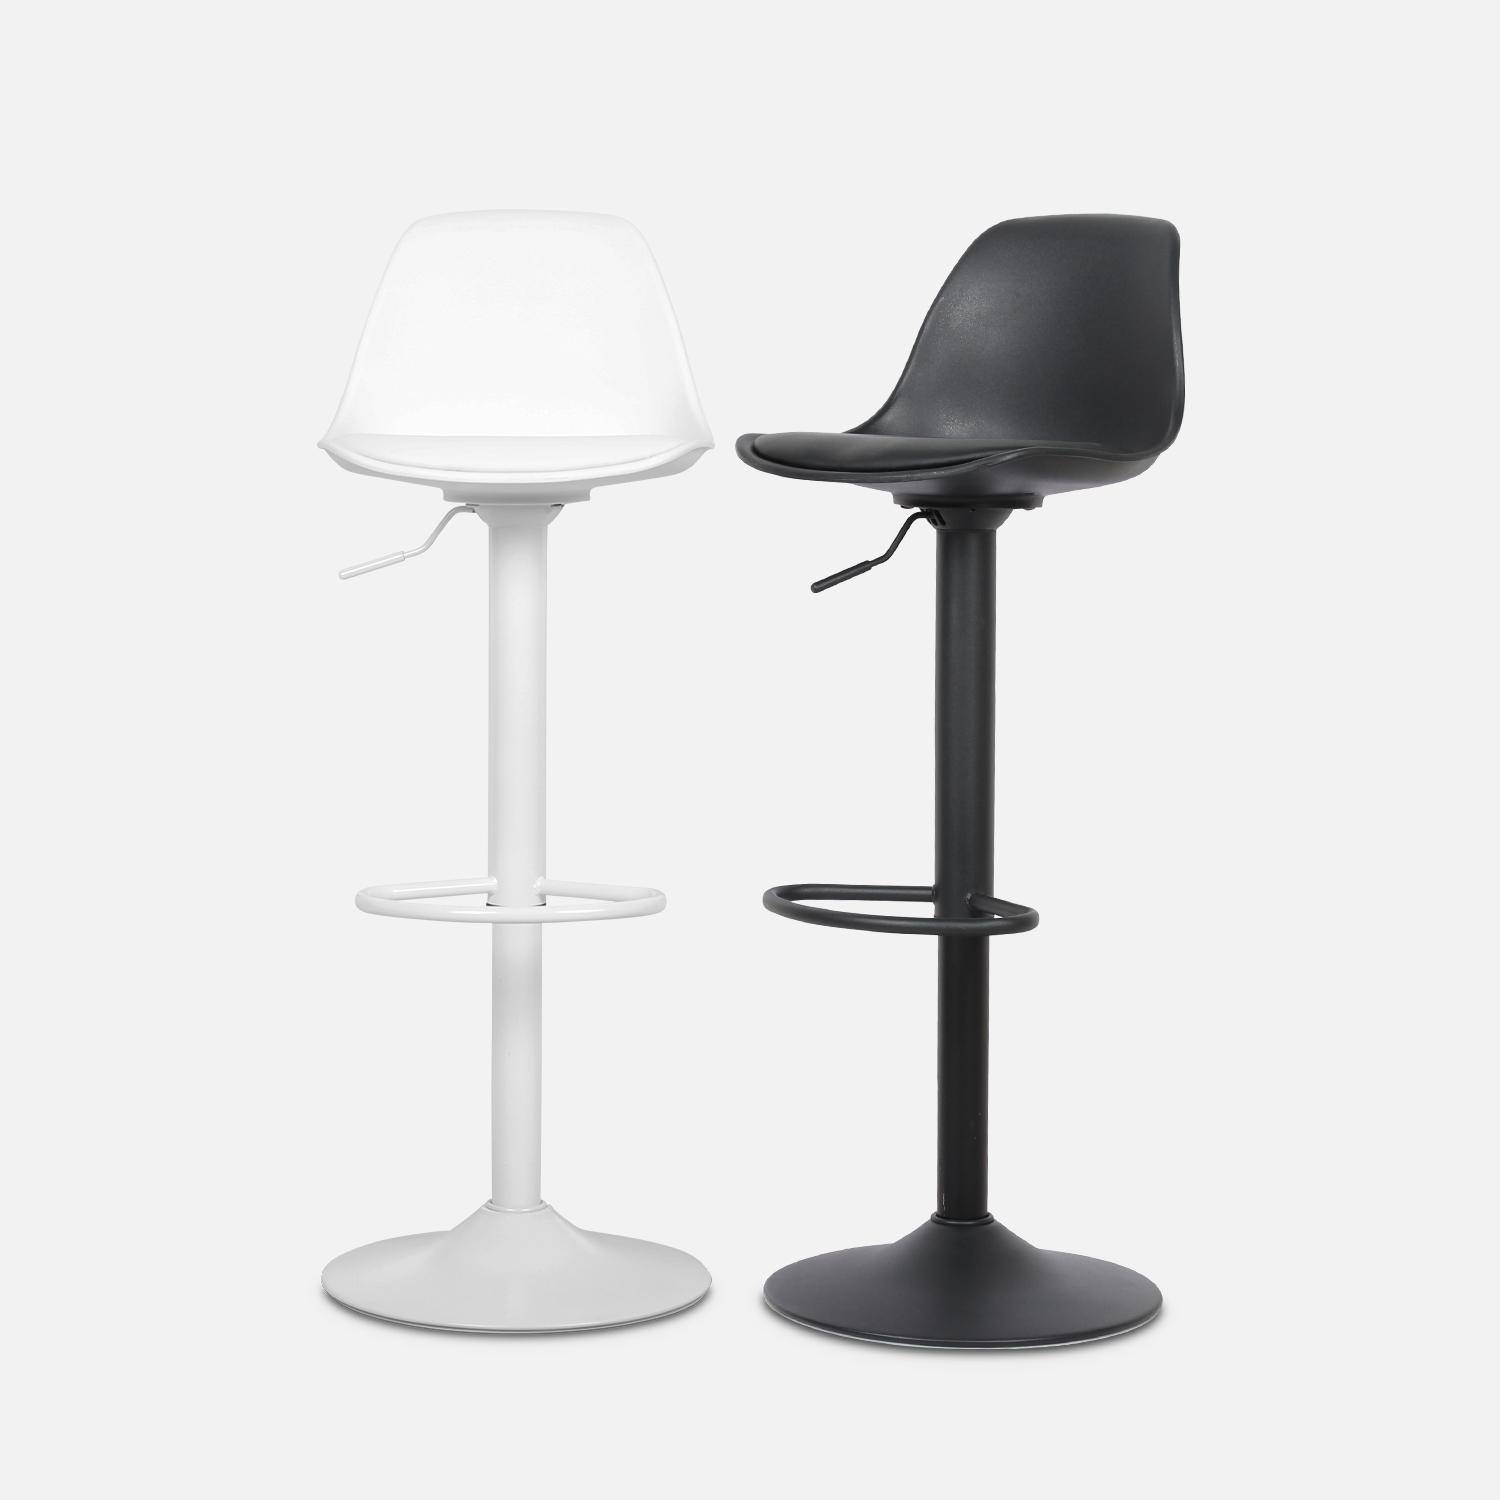 Pair of faux leather, rounded backrest, adjustable bar stools, seat height 61.5 - 83.5cm - Noah - White Photo7